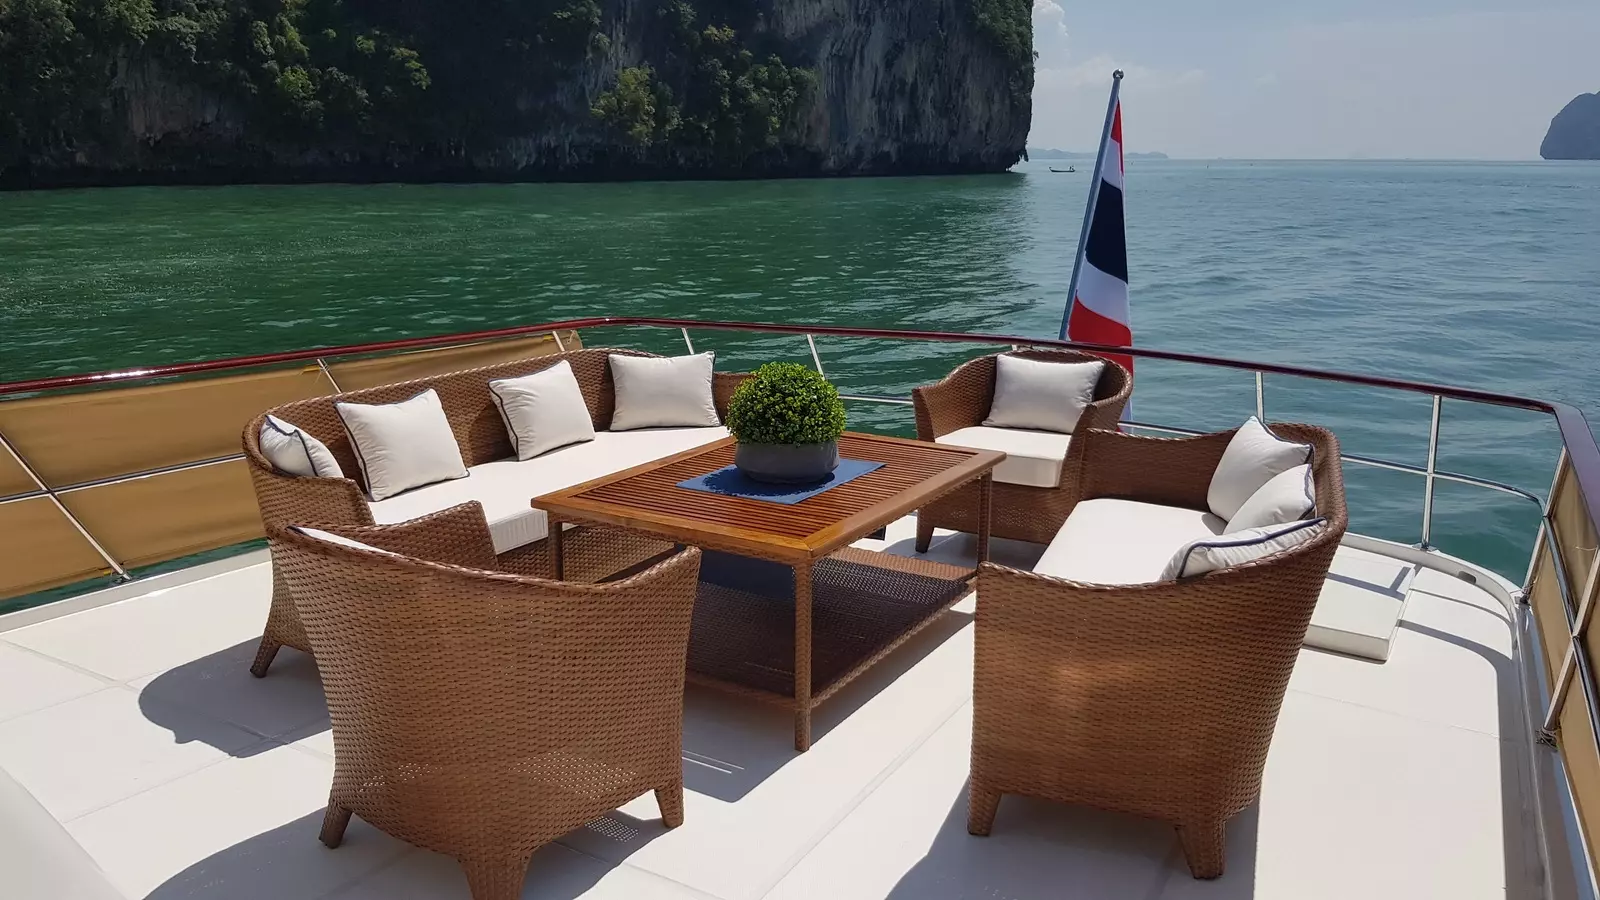 Sea Princess by Defever - Special Offer for a private Motor Yacht Charter in Pattaya with a crew